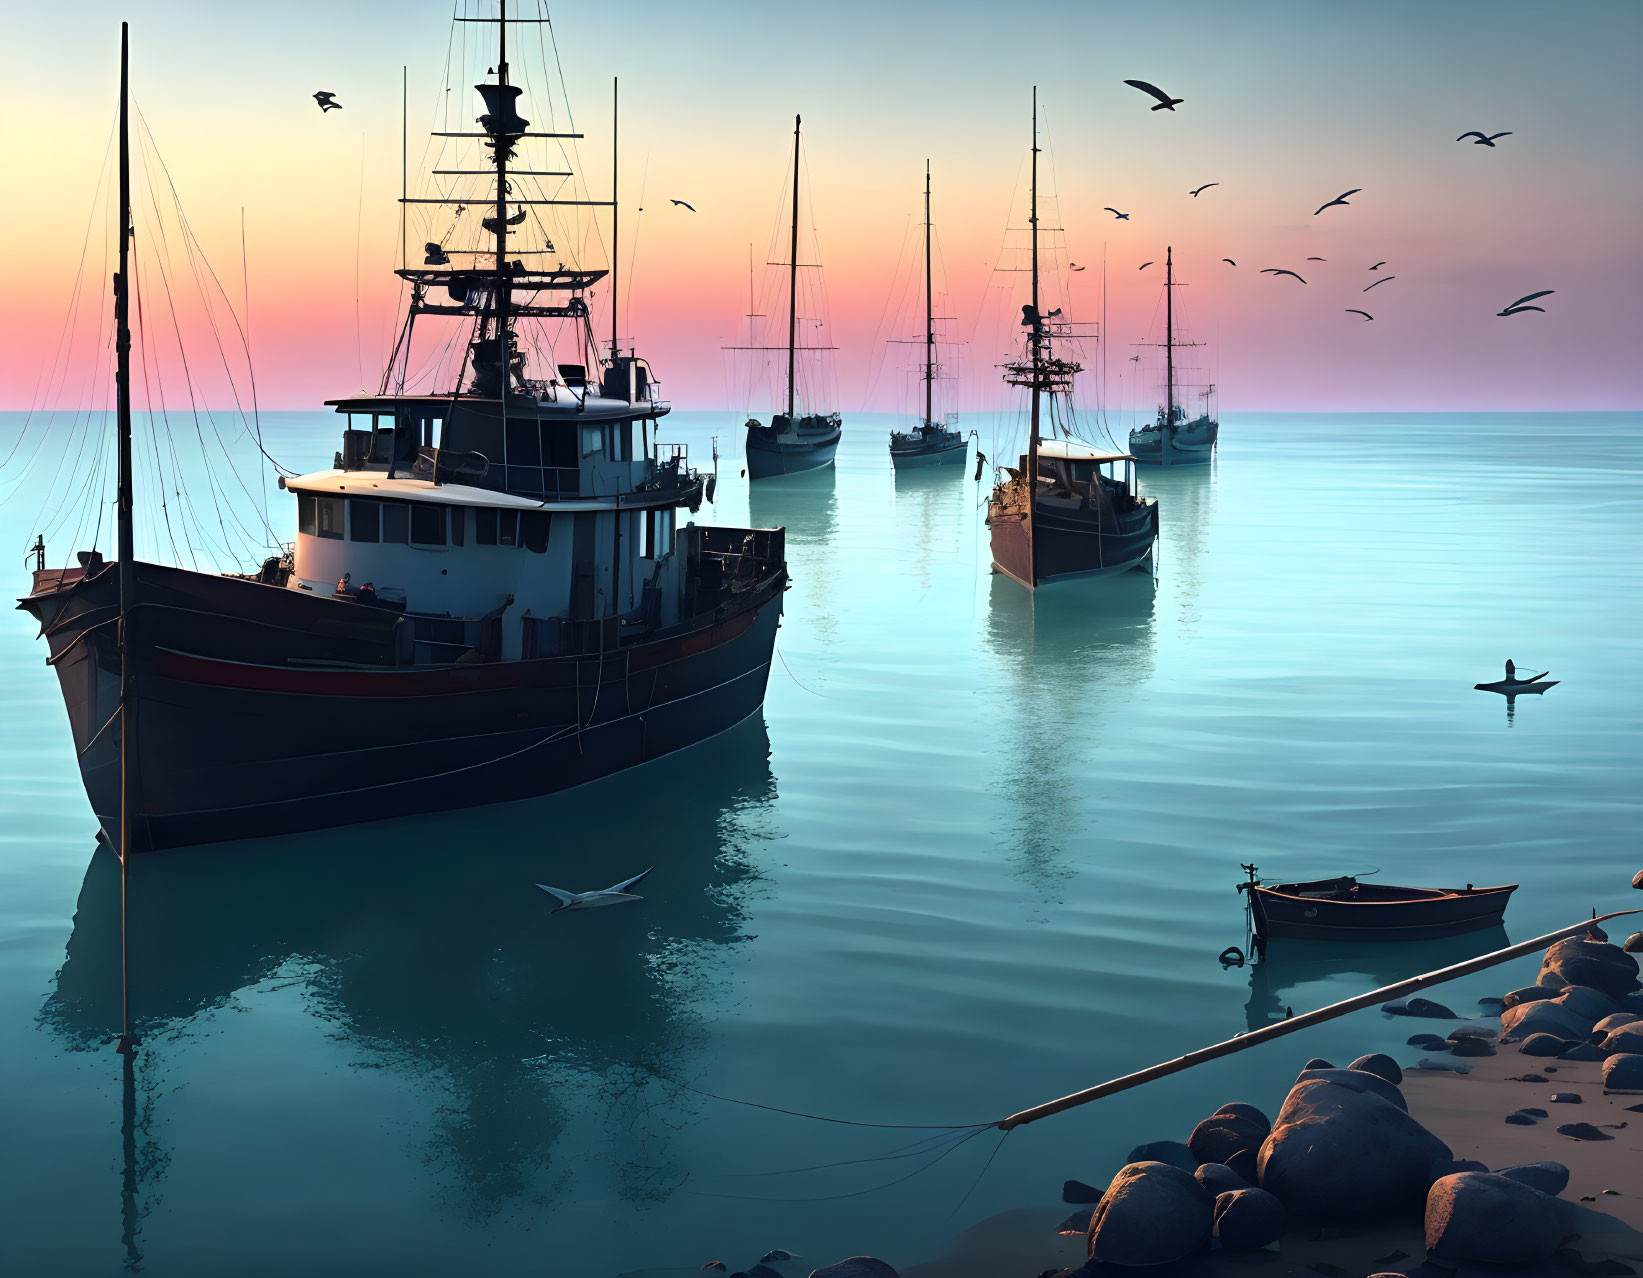 Colorful Dawn/Dusk Sky with Fishing Boats and Seagulls